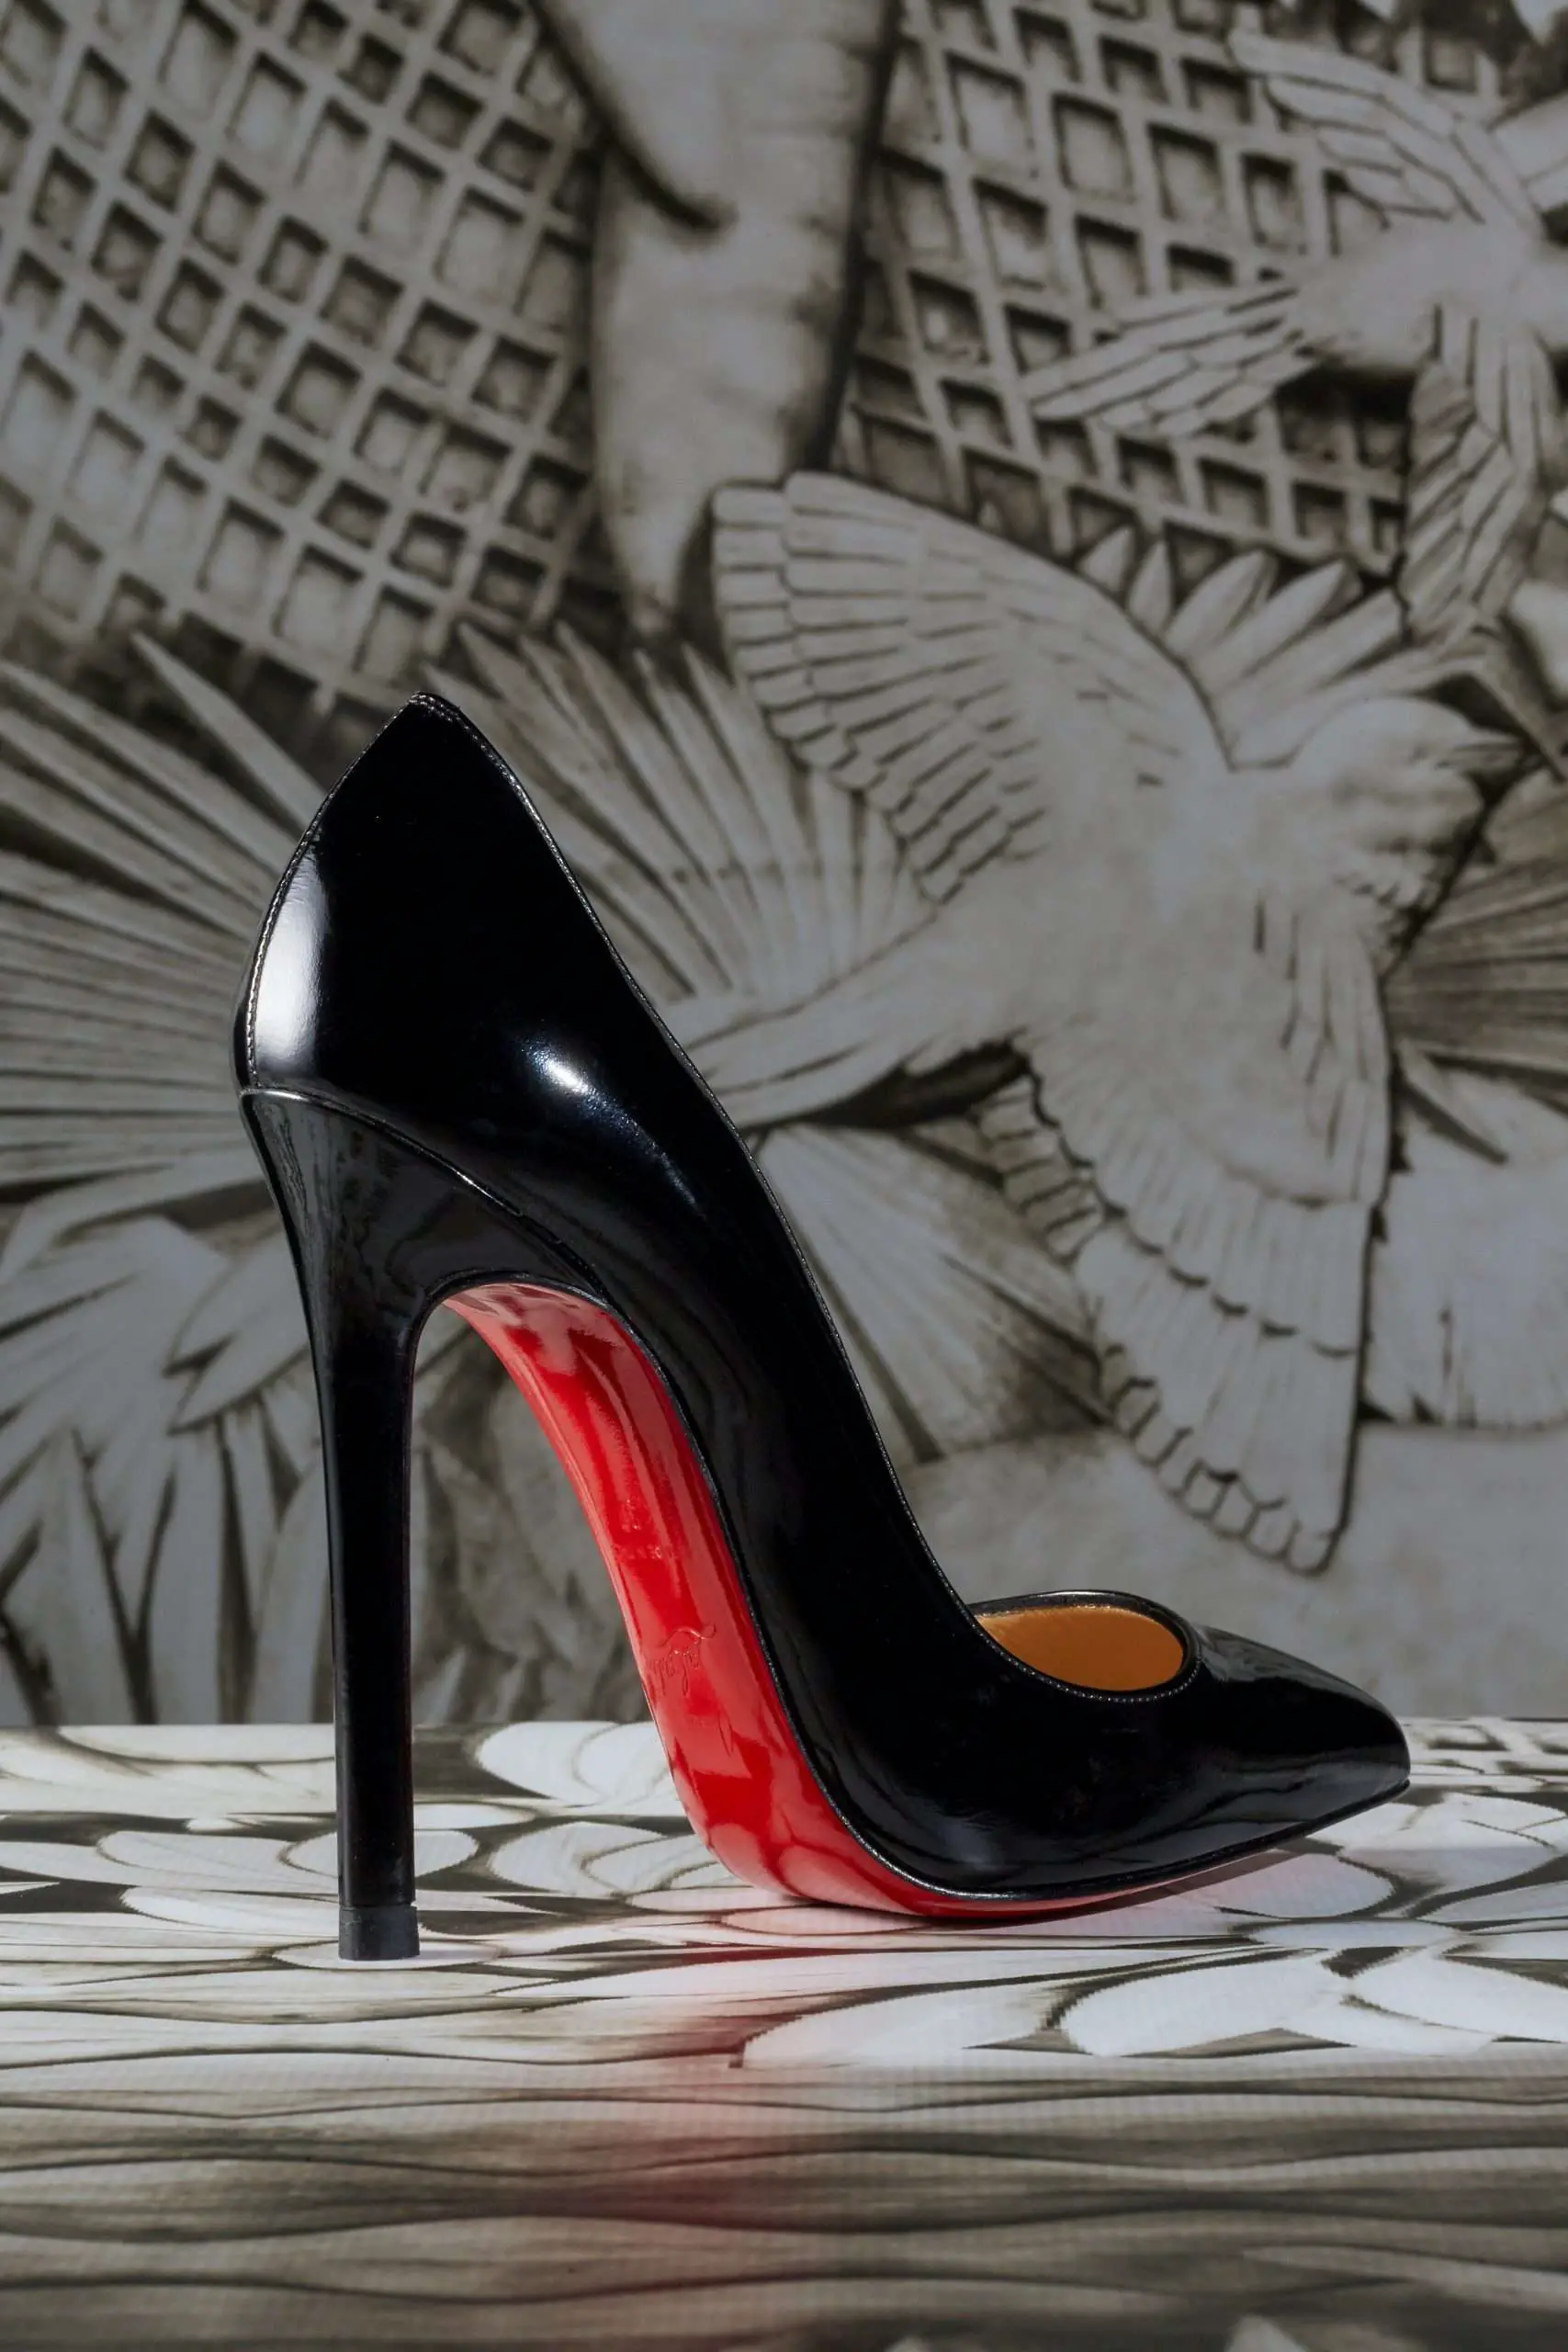 Christian Louboutin and his red